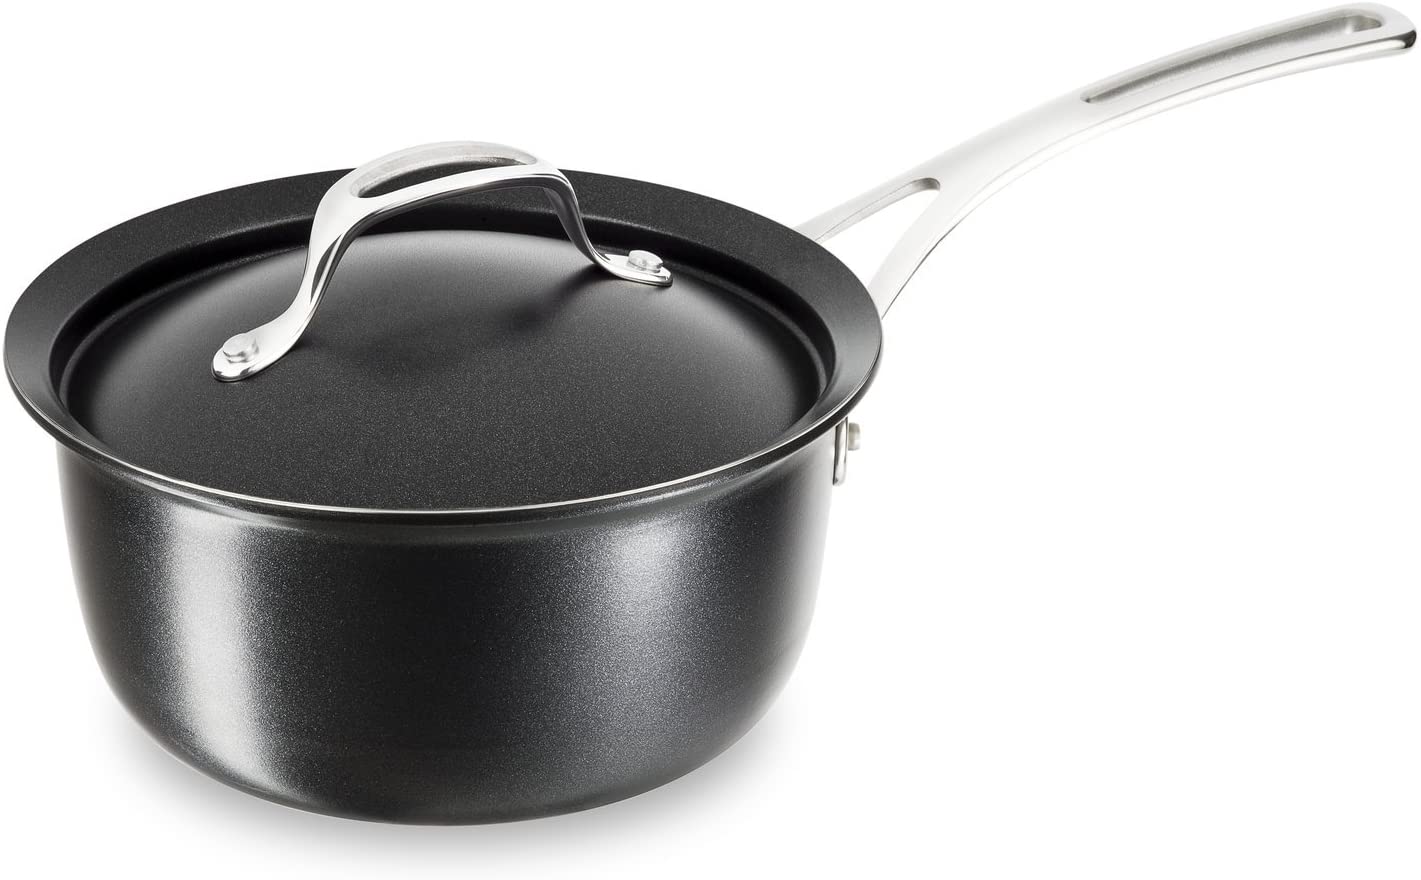 Tefal – E7552444 – Aluminium/Stainless Steel 20 cm Saucepan with Lid Experience